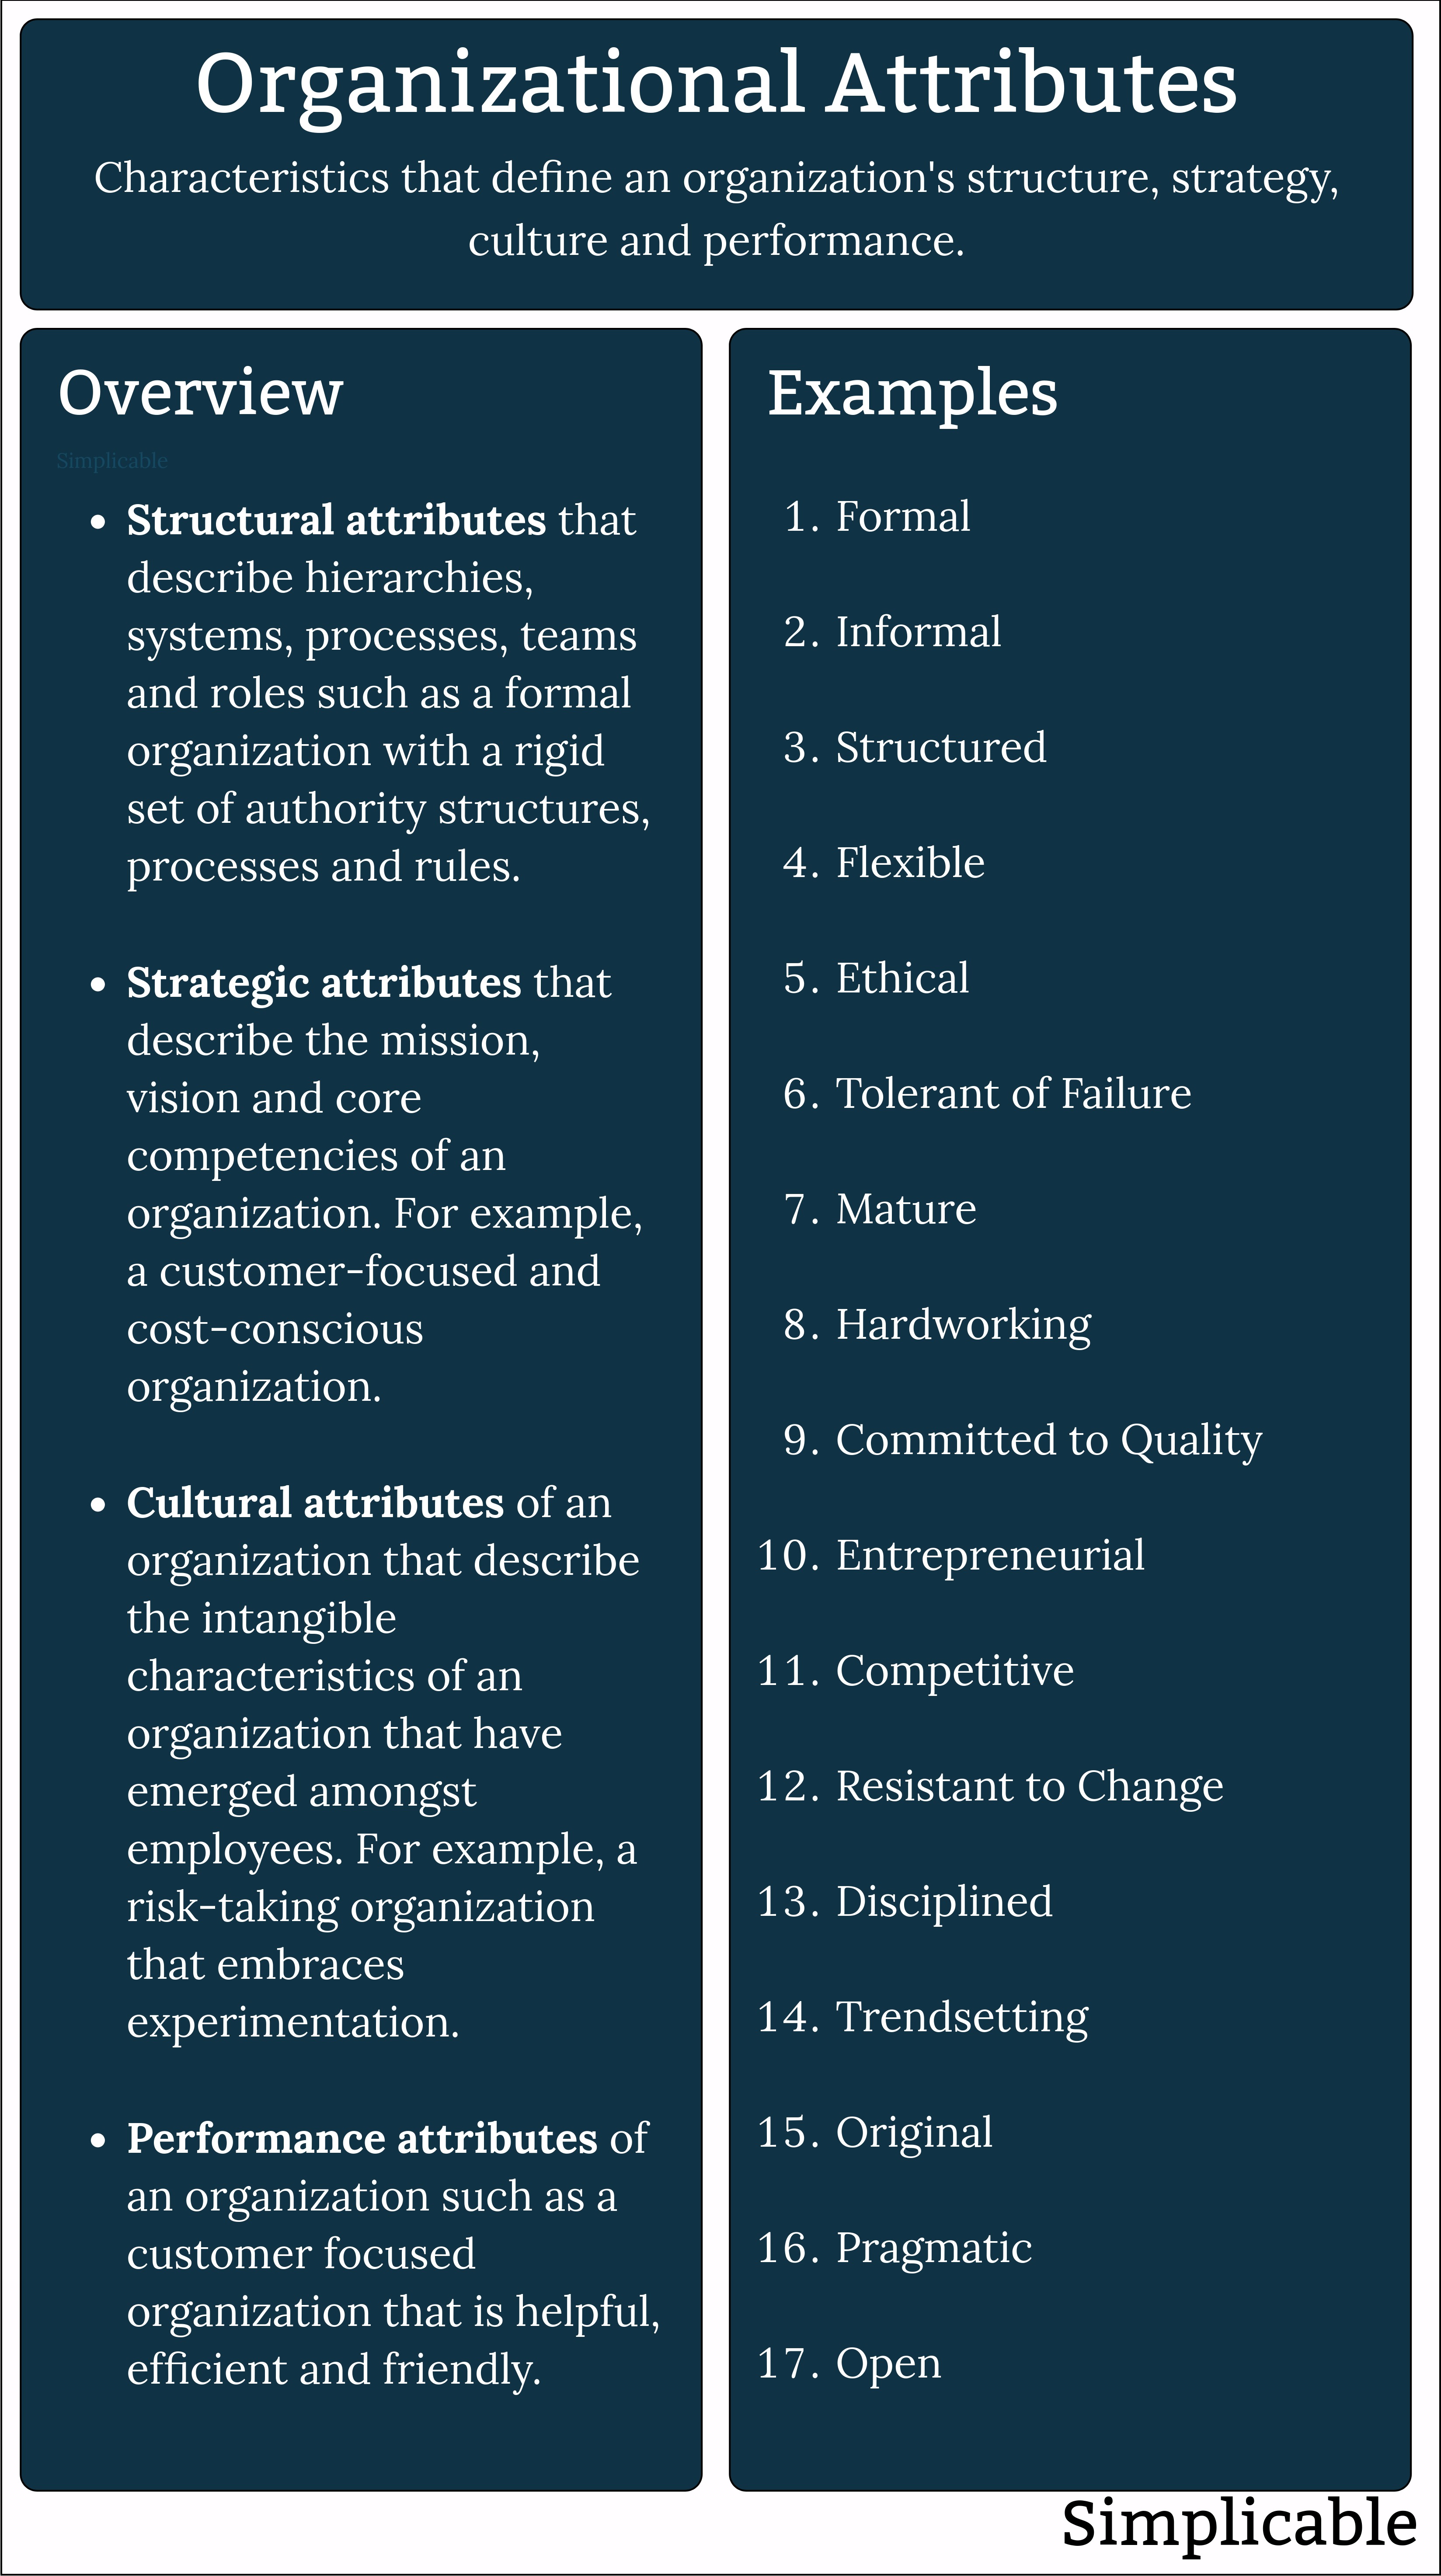 organizational attributes overview and examples